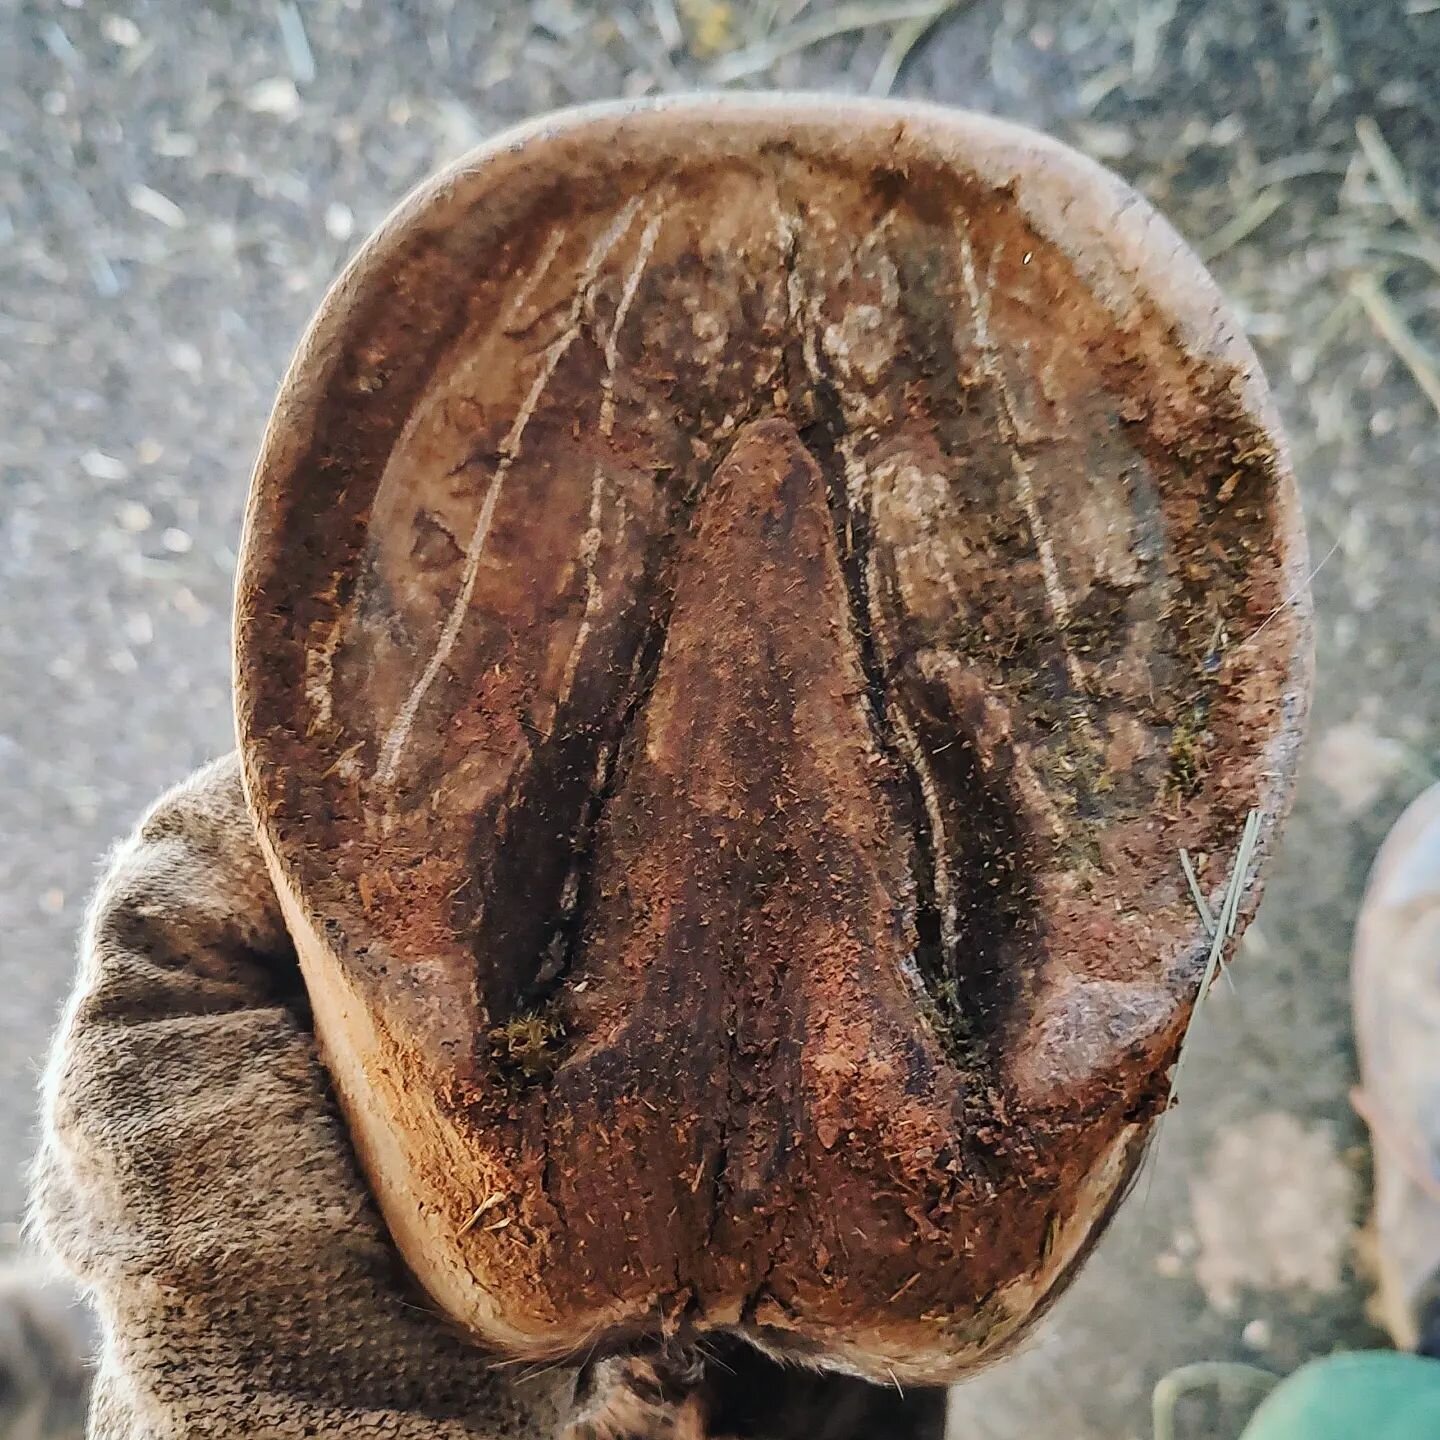 Swipe to trim! Hoof 1 of 28 today, a front right. Dressage Lusitano.
.
.
.
.
.
.
.
.
#hoofcare #dressagehorse #hoof #hooftrimming